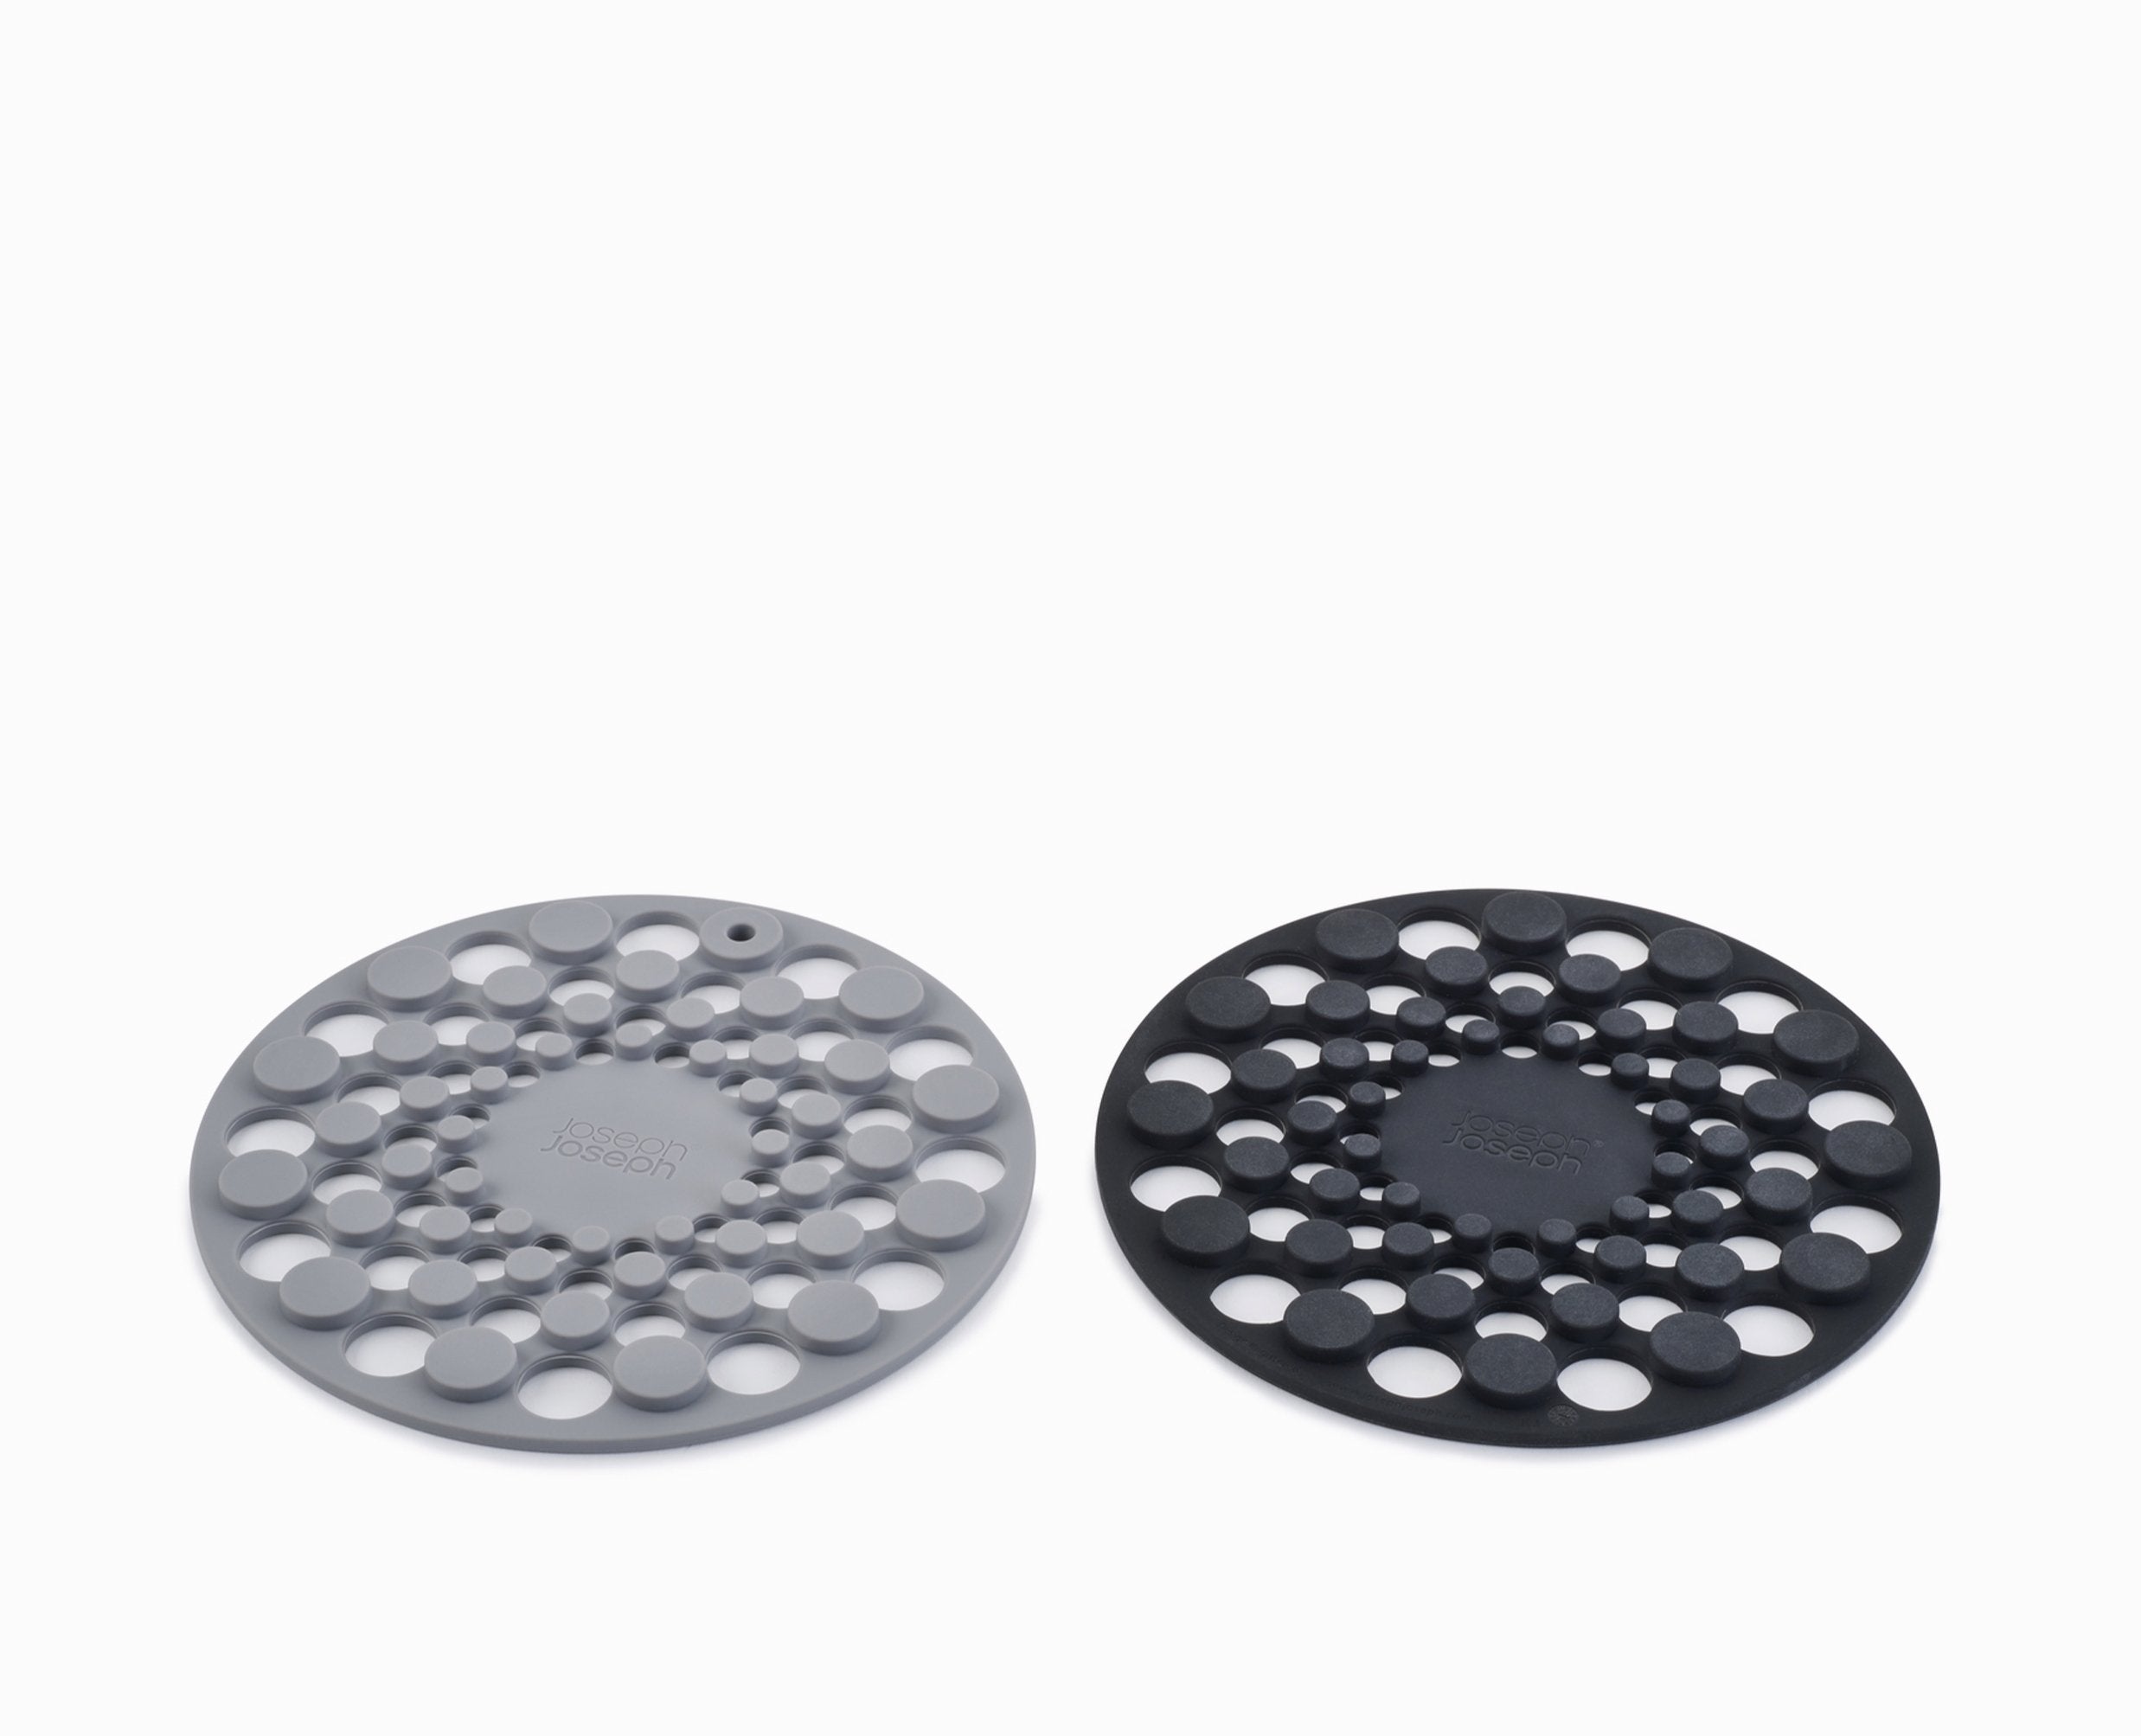 BEON.COM.AU  These two heat and stain-resistant circular trivets fit neatly together for compact storage.  Heat-resistant up to 220˚C (428˚F) Protects surfaces from scratches and heat damage Stain-resistant Store together saving valuable drawer space Easy to clean - dishwasher safe  Specifications  Care &amp... Joseph Joseph at BEON.COM.AU